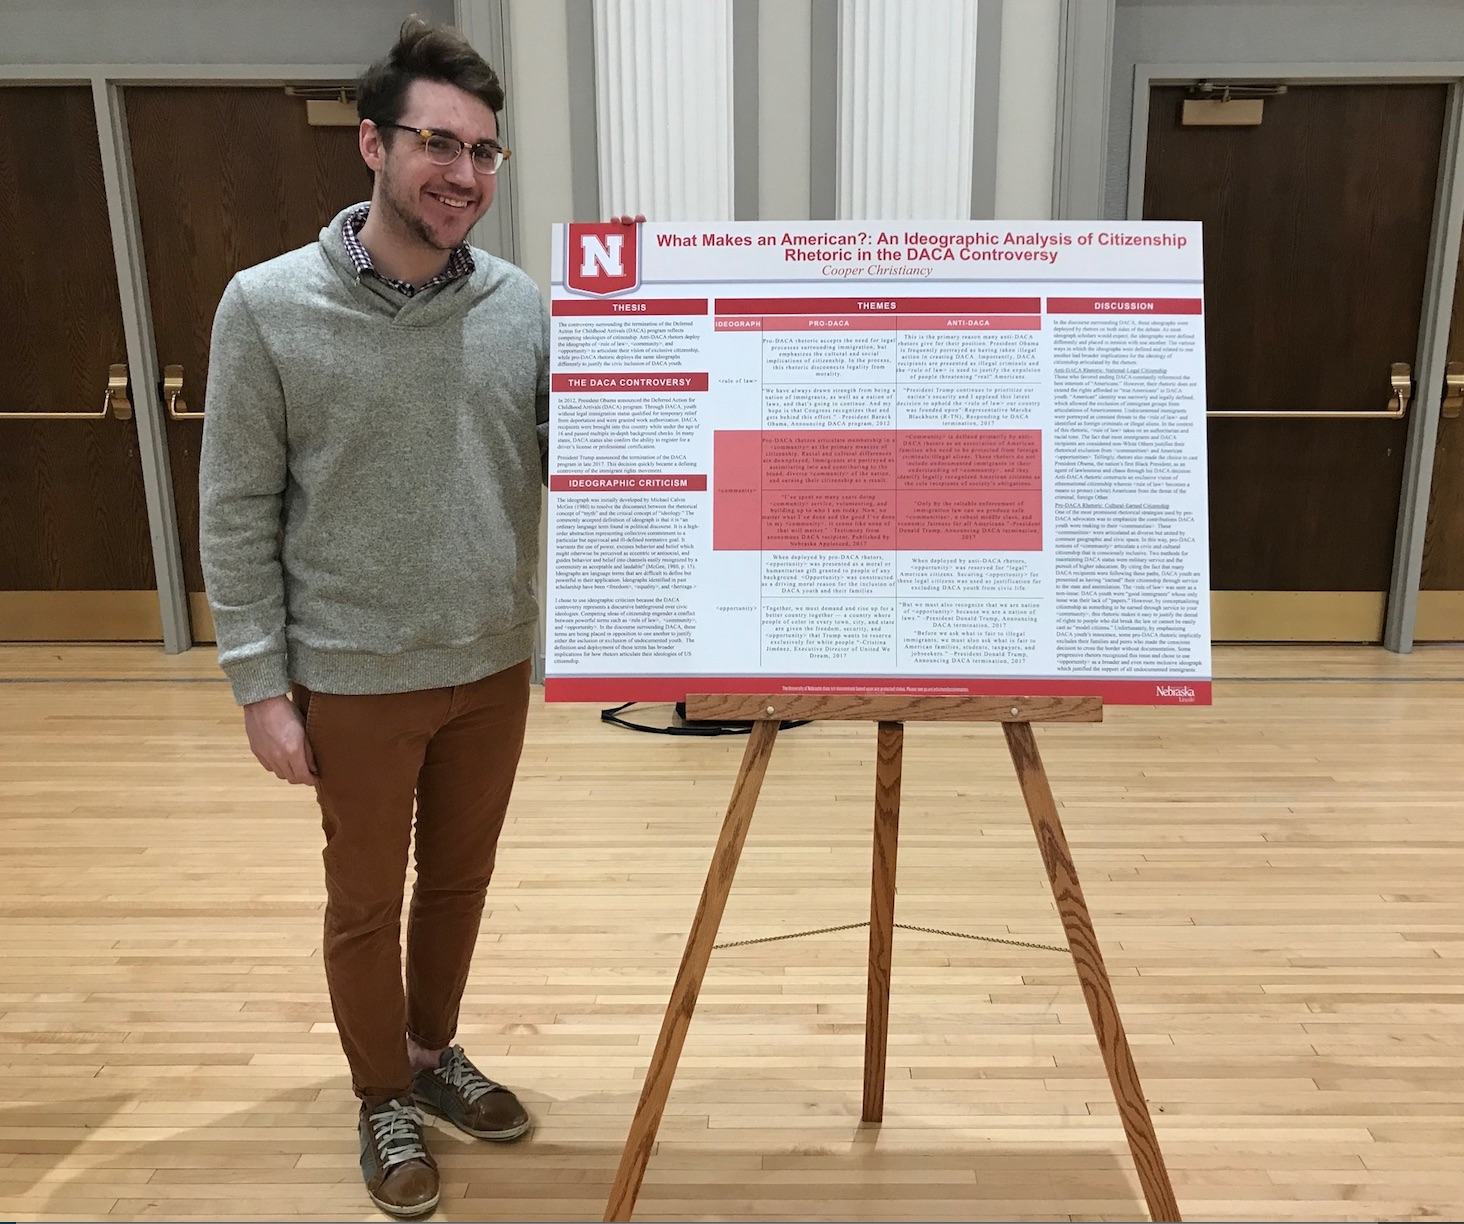 Cooper Christiancy presents his work at Fall 2017 Capstone Poster Session